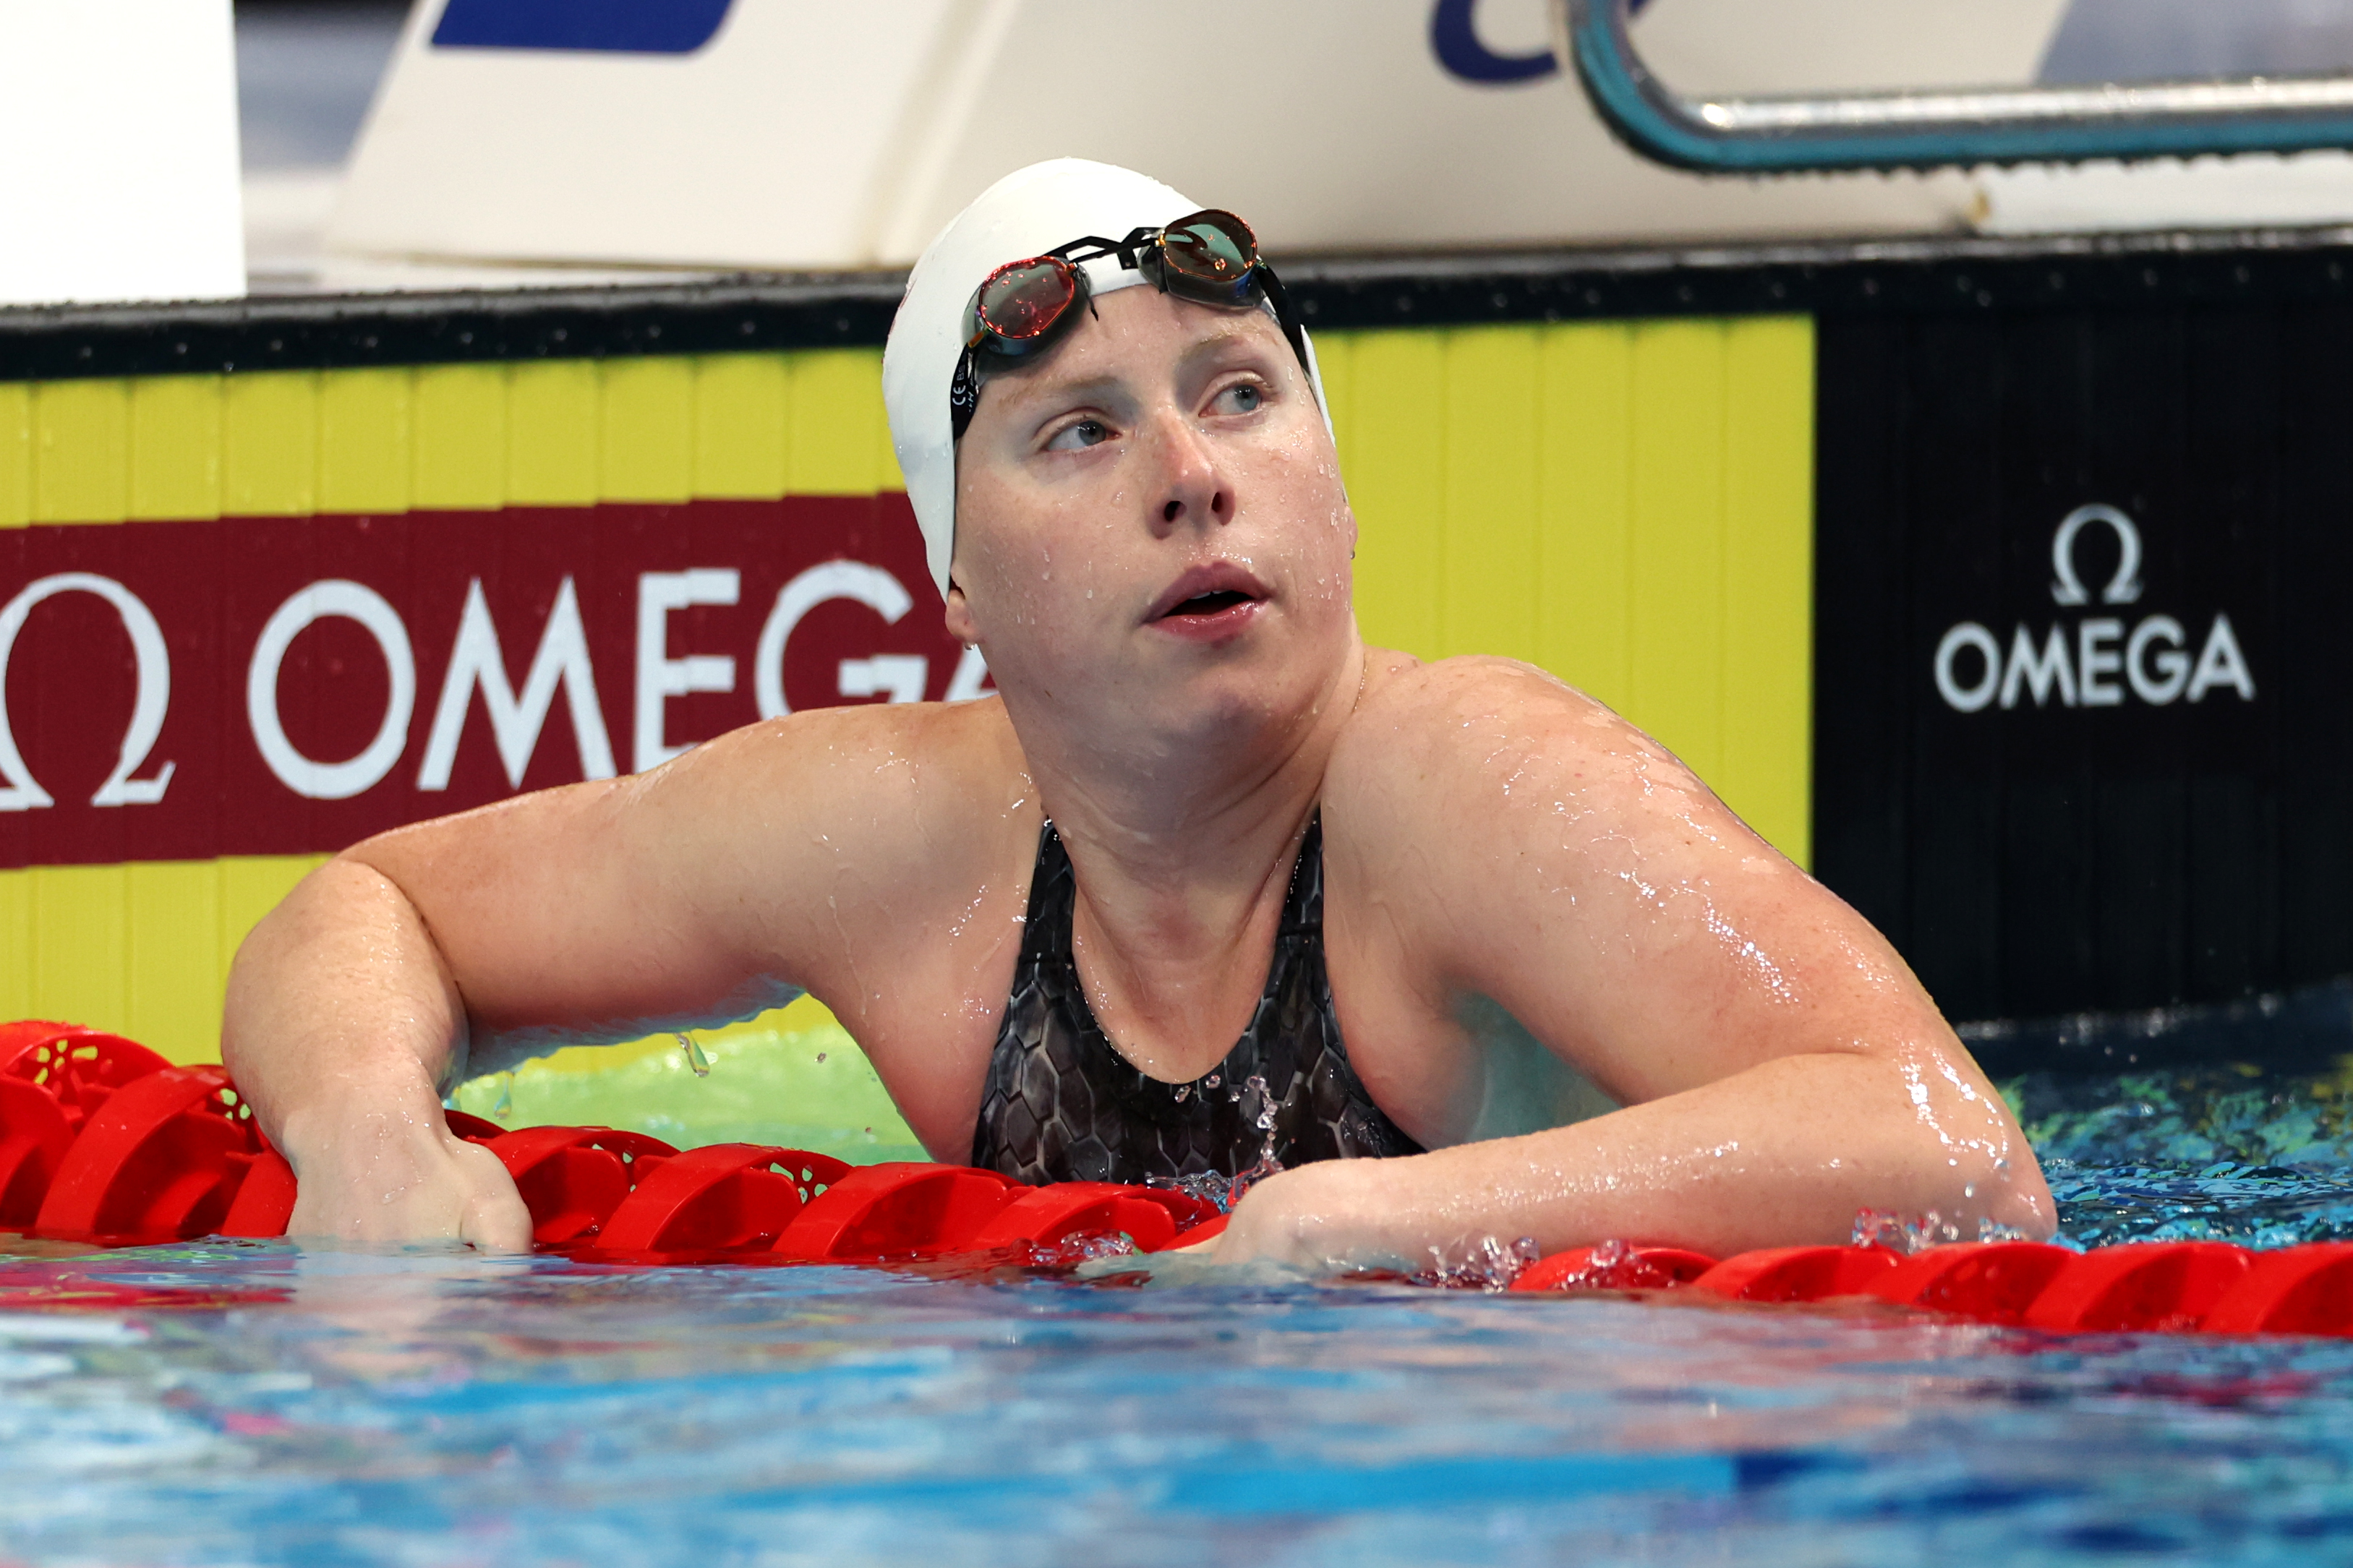 Hoosier Swimmers To Watch At World Trials Lilly King,